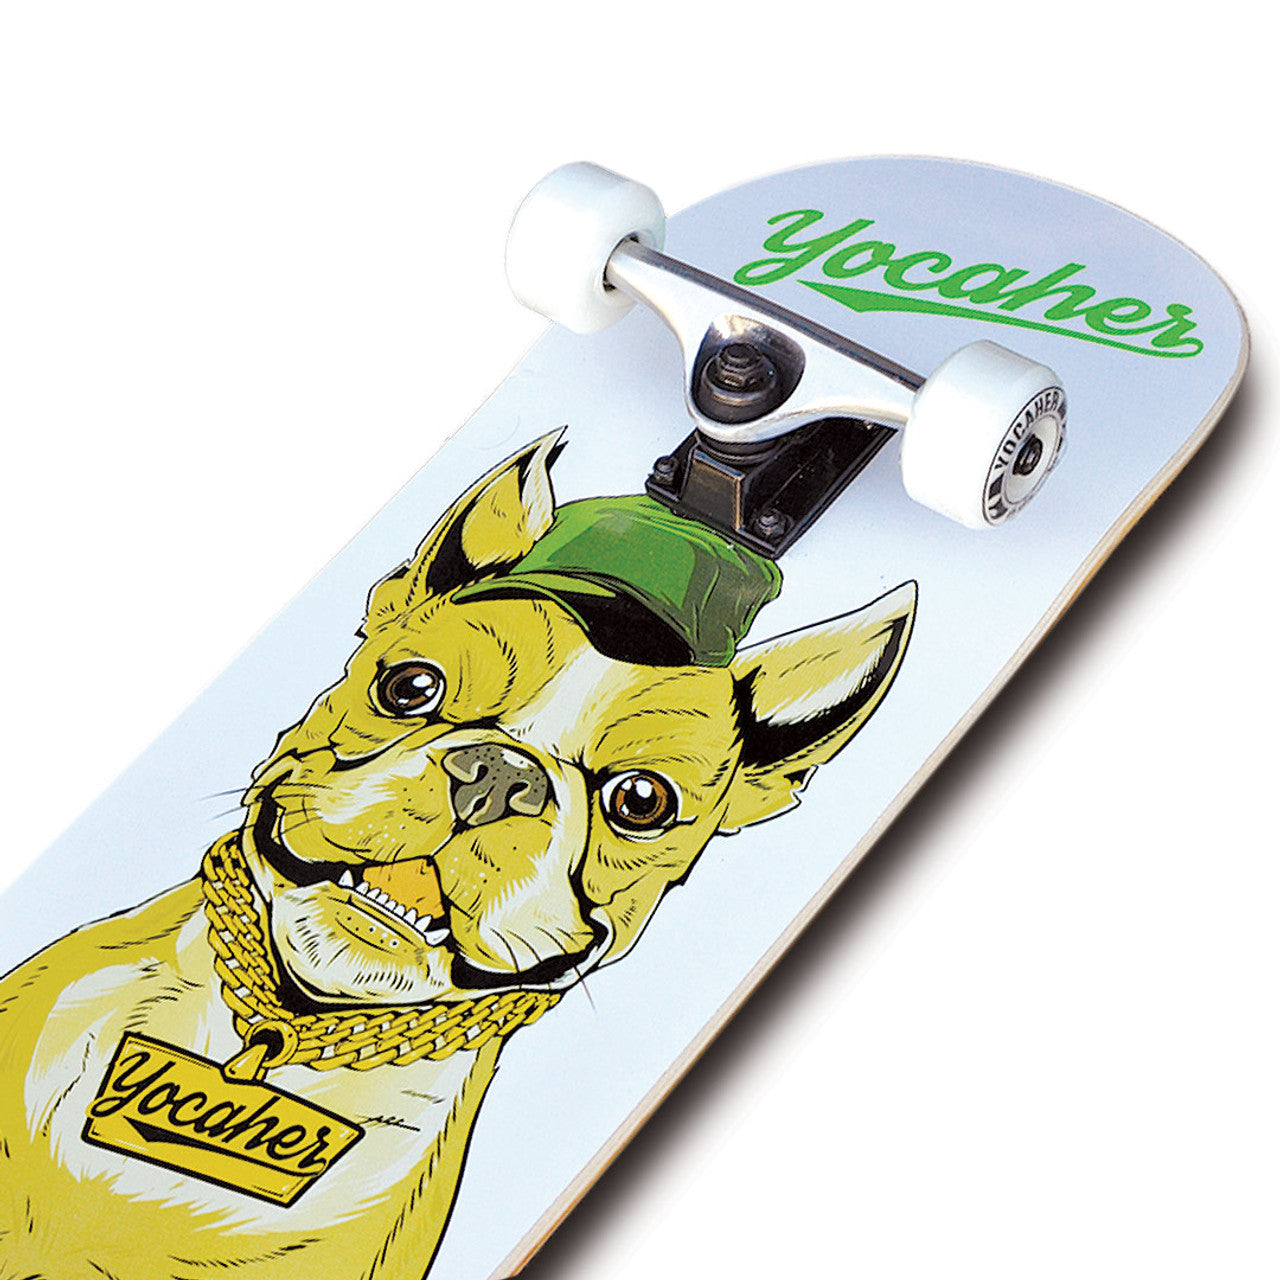 Yocaher Complete Skateboard 7.75" - Cool Pup French Bulldog